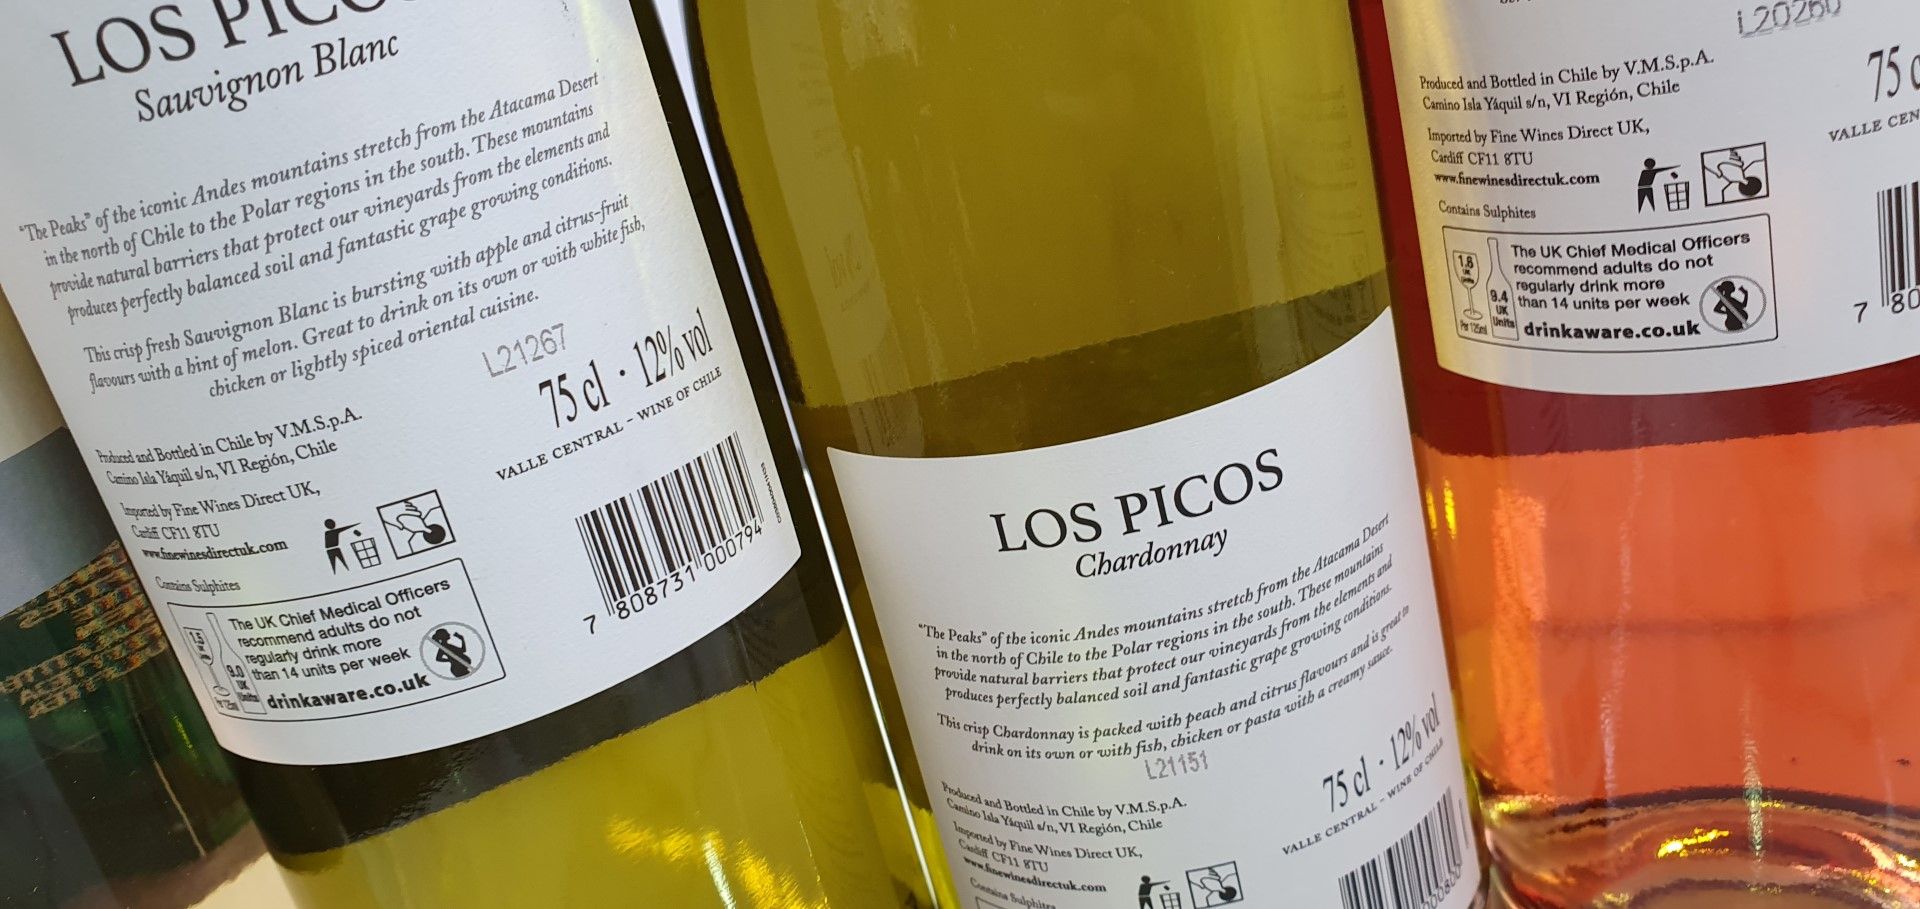 5 x Bottles of Assorted 75cl Wines - Includes Los Picos Sauvignon Blanc, Chardonnay, Rosé and Via - Image 5 of 7